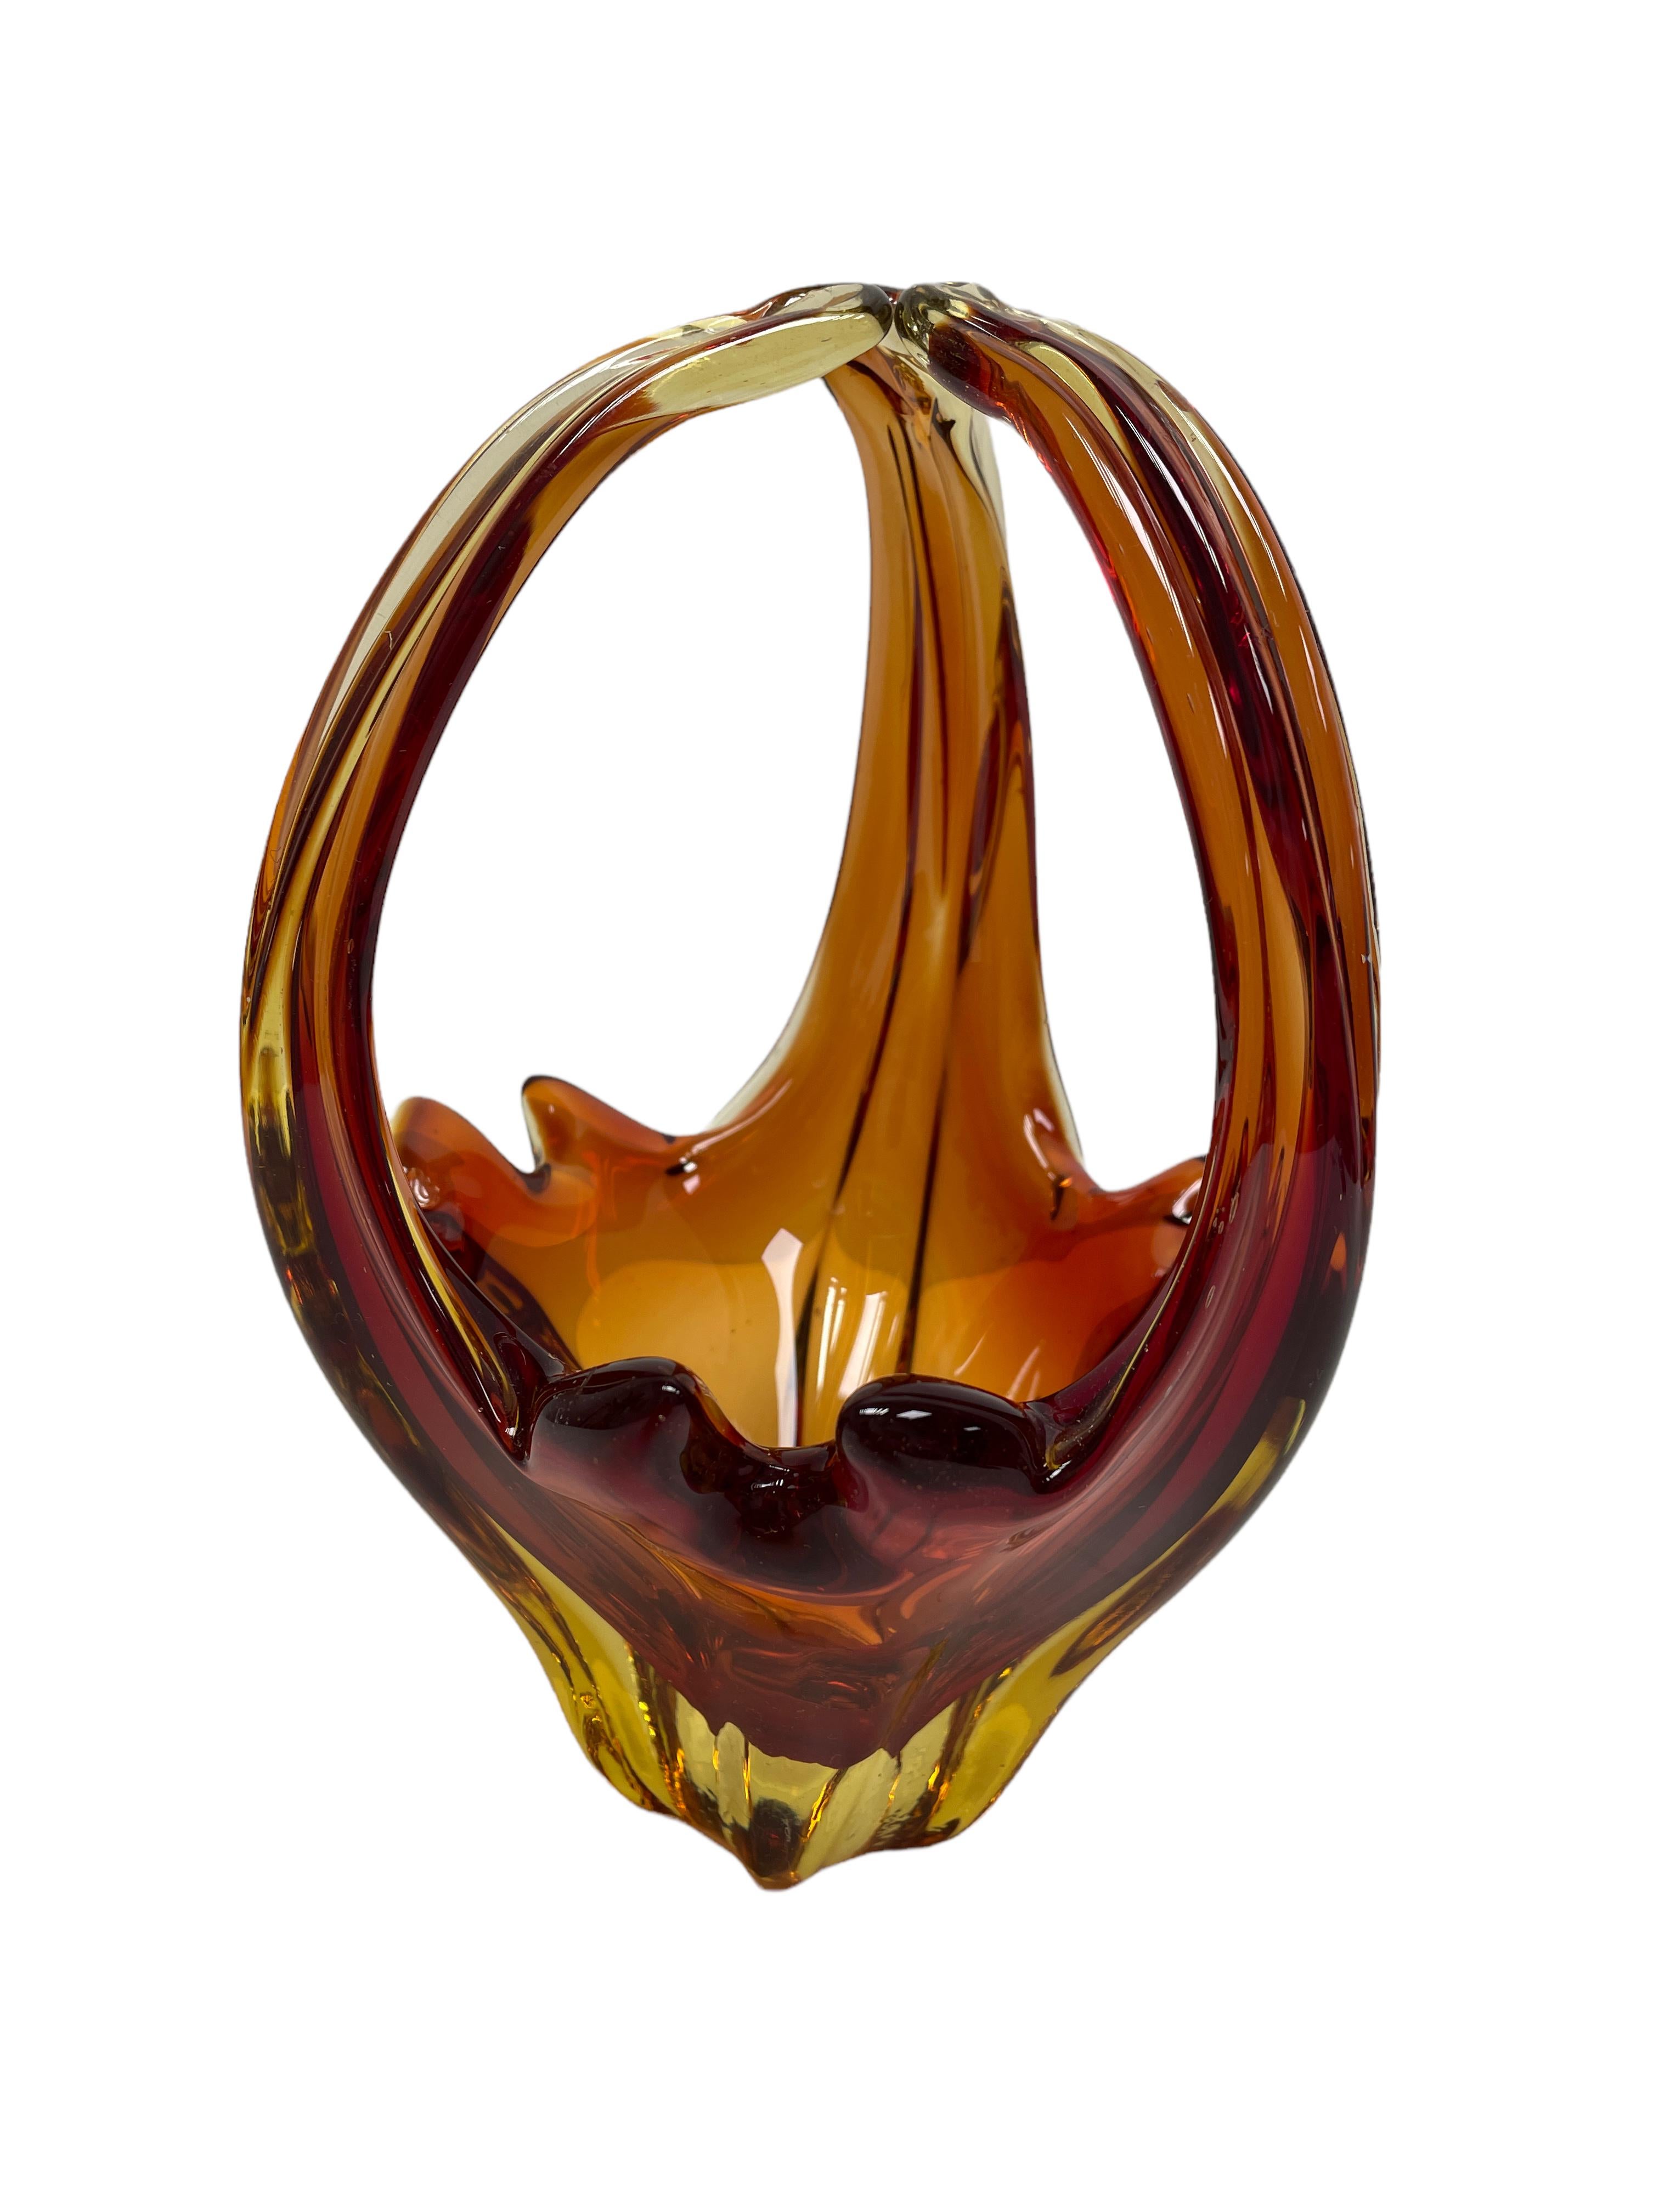 Mid-Century Modern Murano Art Glass Amber Brown Basket Fruit Bowl Catchall Italy, Sommerso, 1970s